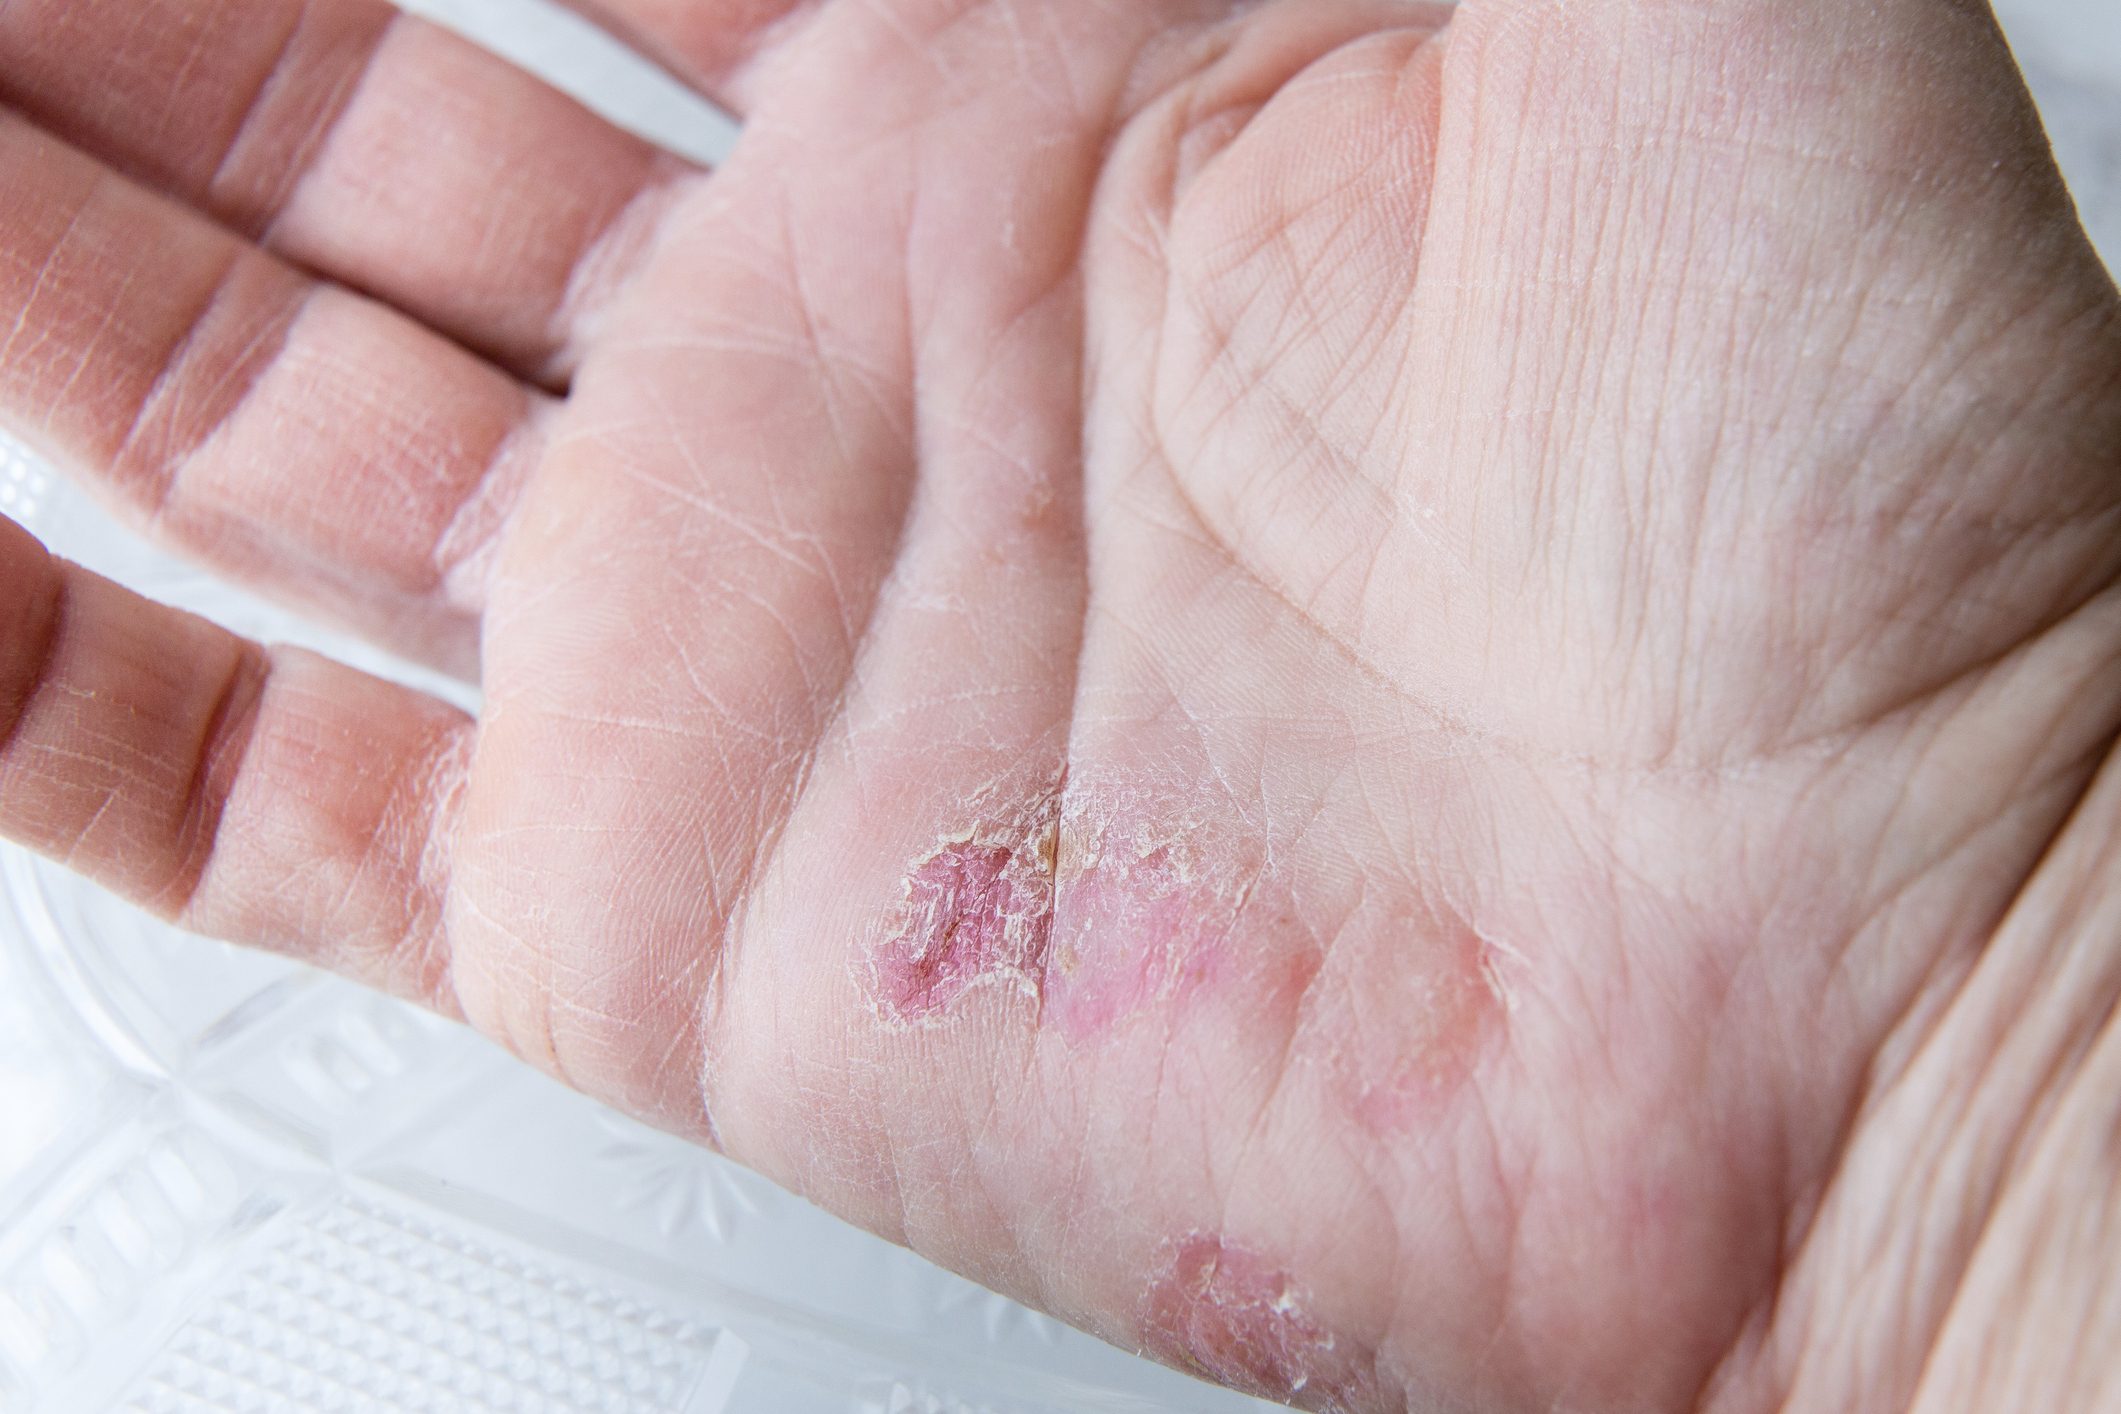 18 Things You Should Know About Palmoplantar Psoriasis